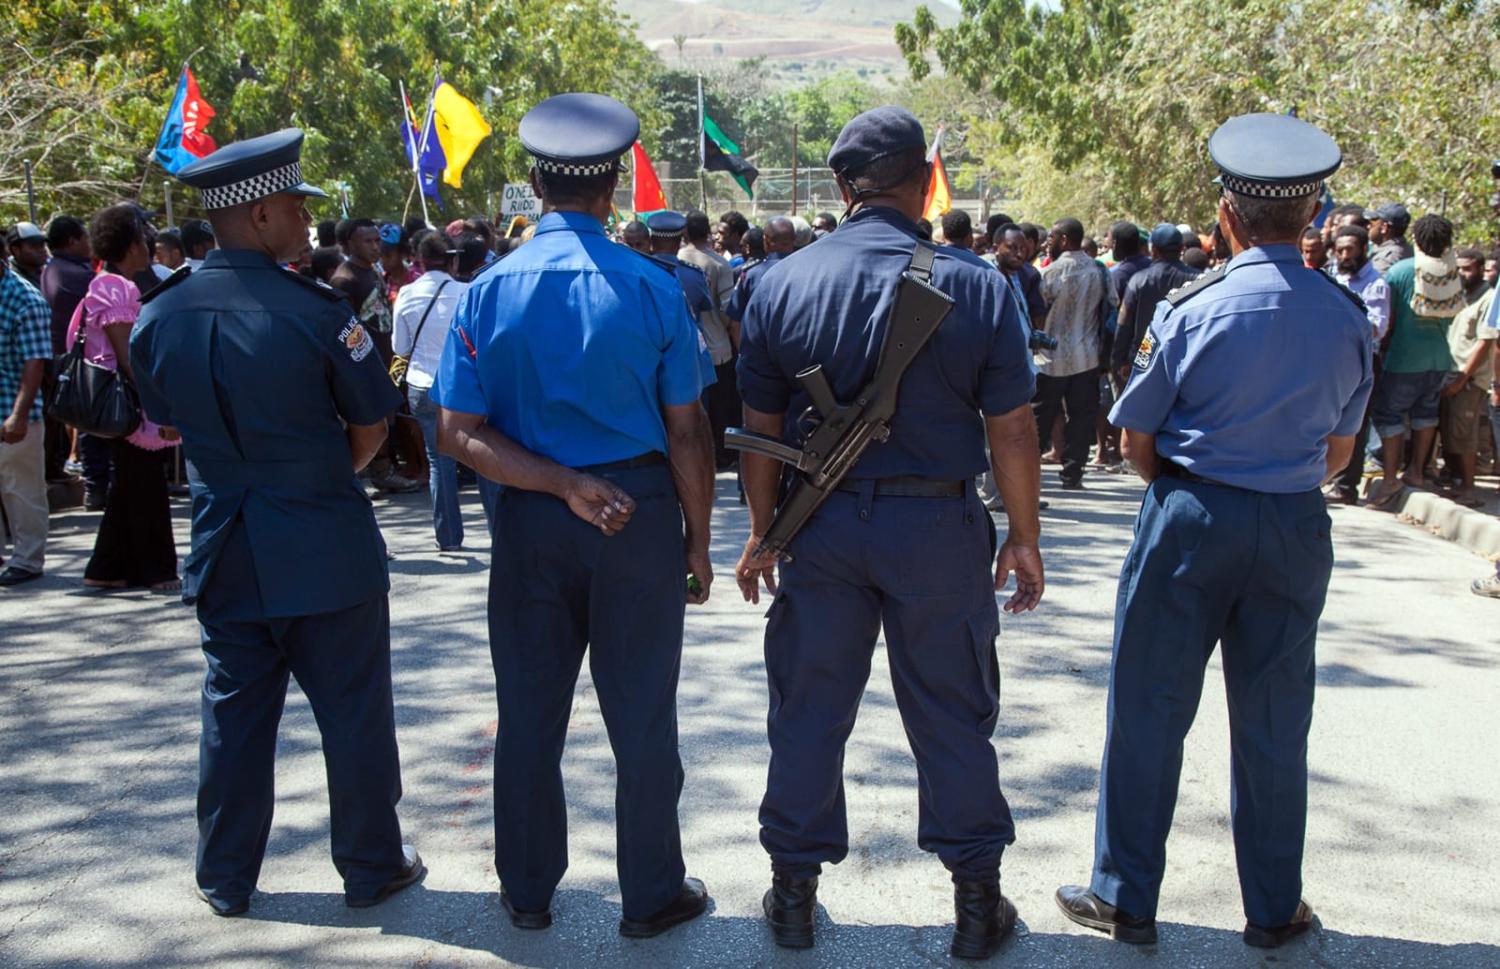 Papua New Guinea police officers watch on as hundreds of students marched towards the university gate in Port Moresby in 2013 to protest against Australia and PNG's asylum seeker plan (Ness Kerton/AFP via Getty Images)